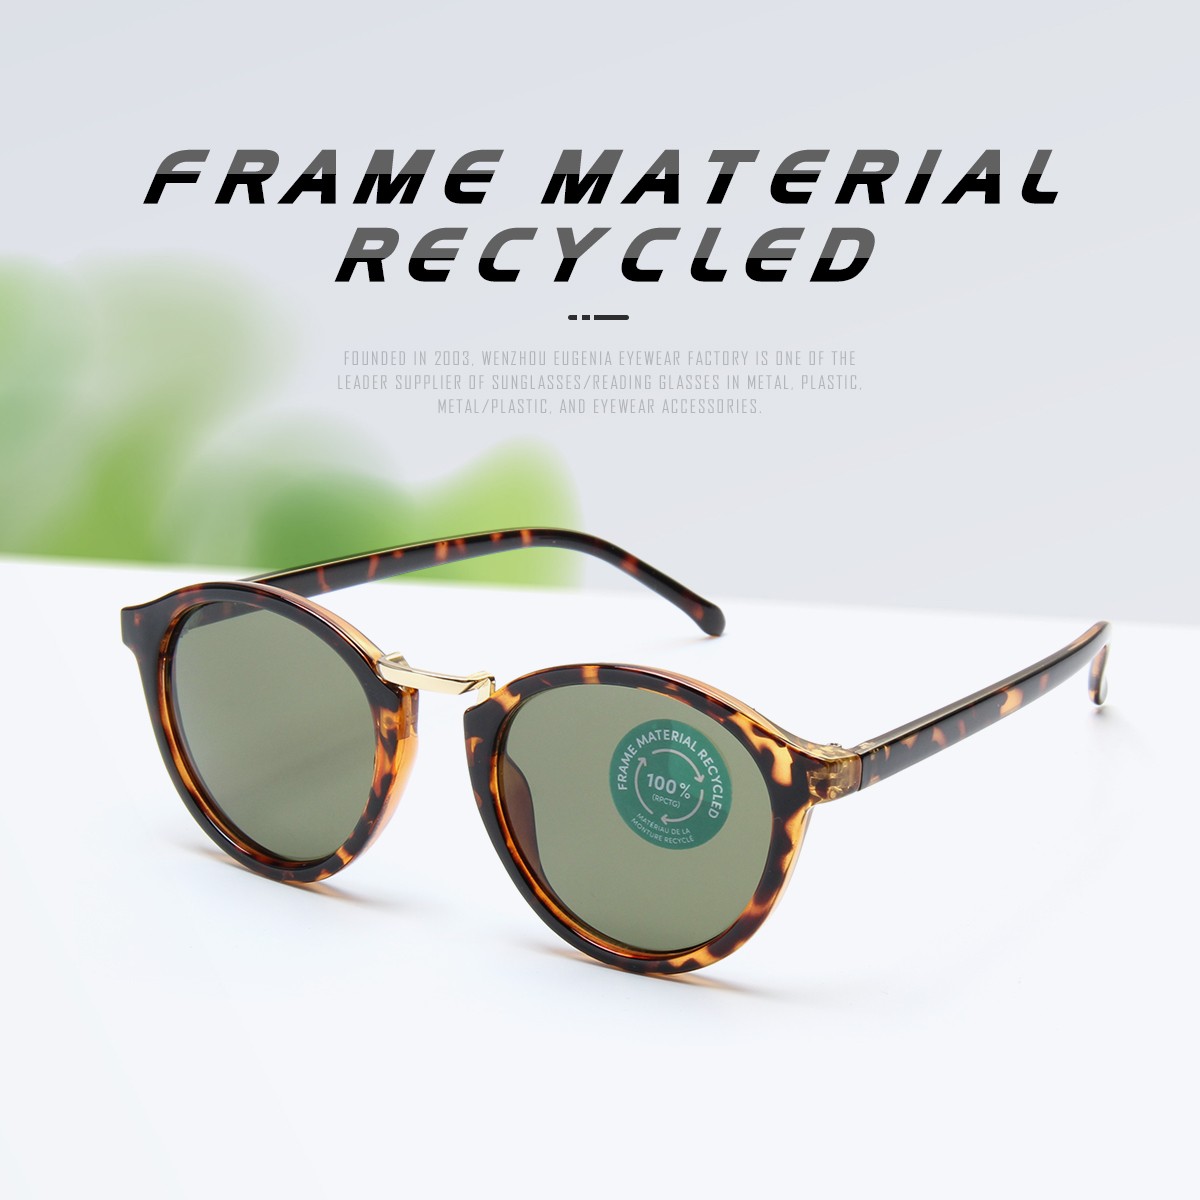 Eugenia highly-rated eco friendly sunglasses factory direct supply bulk buy-1